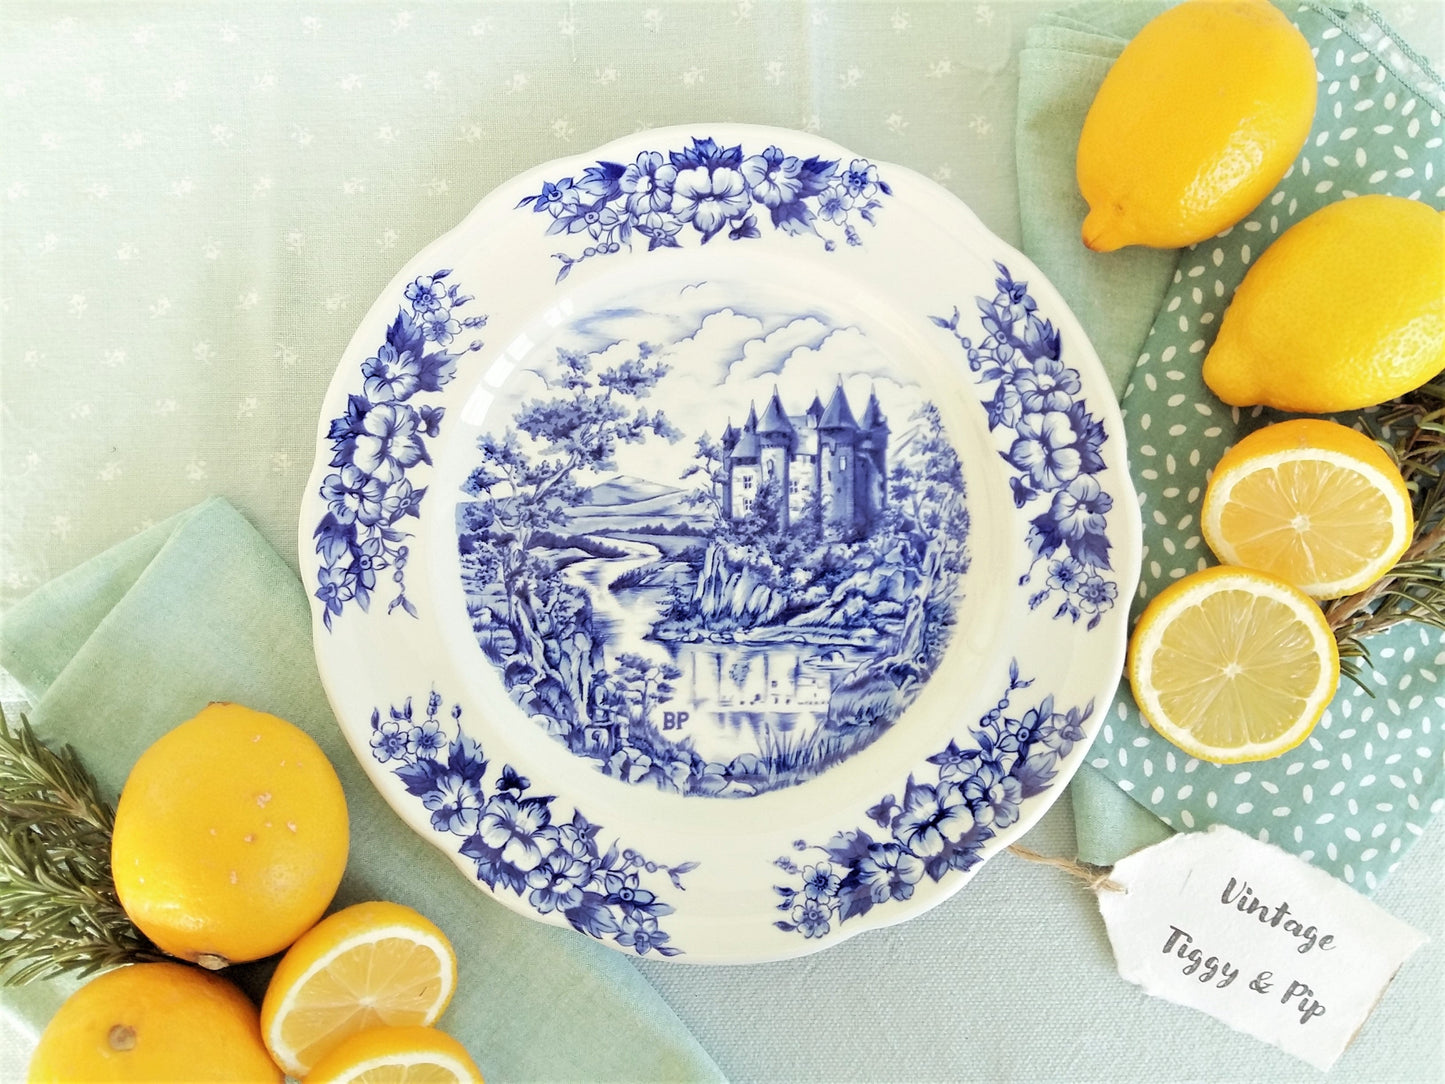 EIGHT Mismatched Blue and White Plates from Tiggy & Pip - €199.00! Shop now at Tiggy and Pip